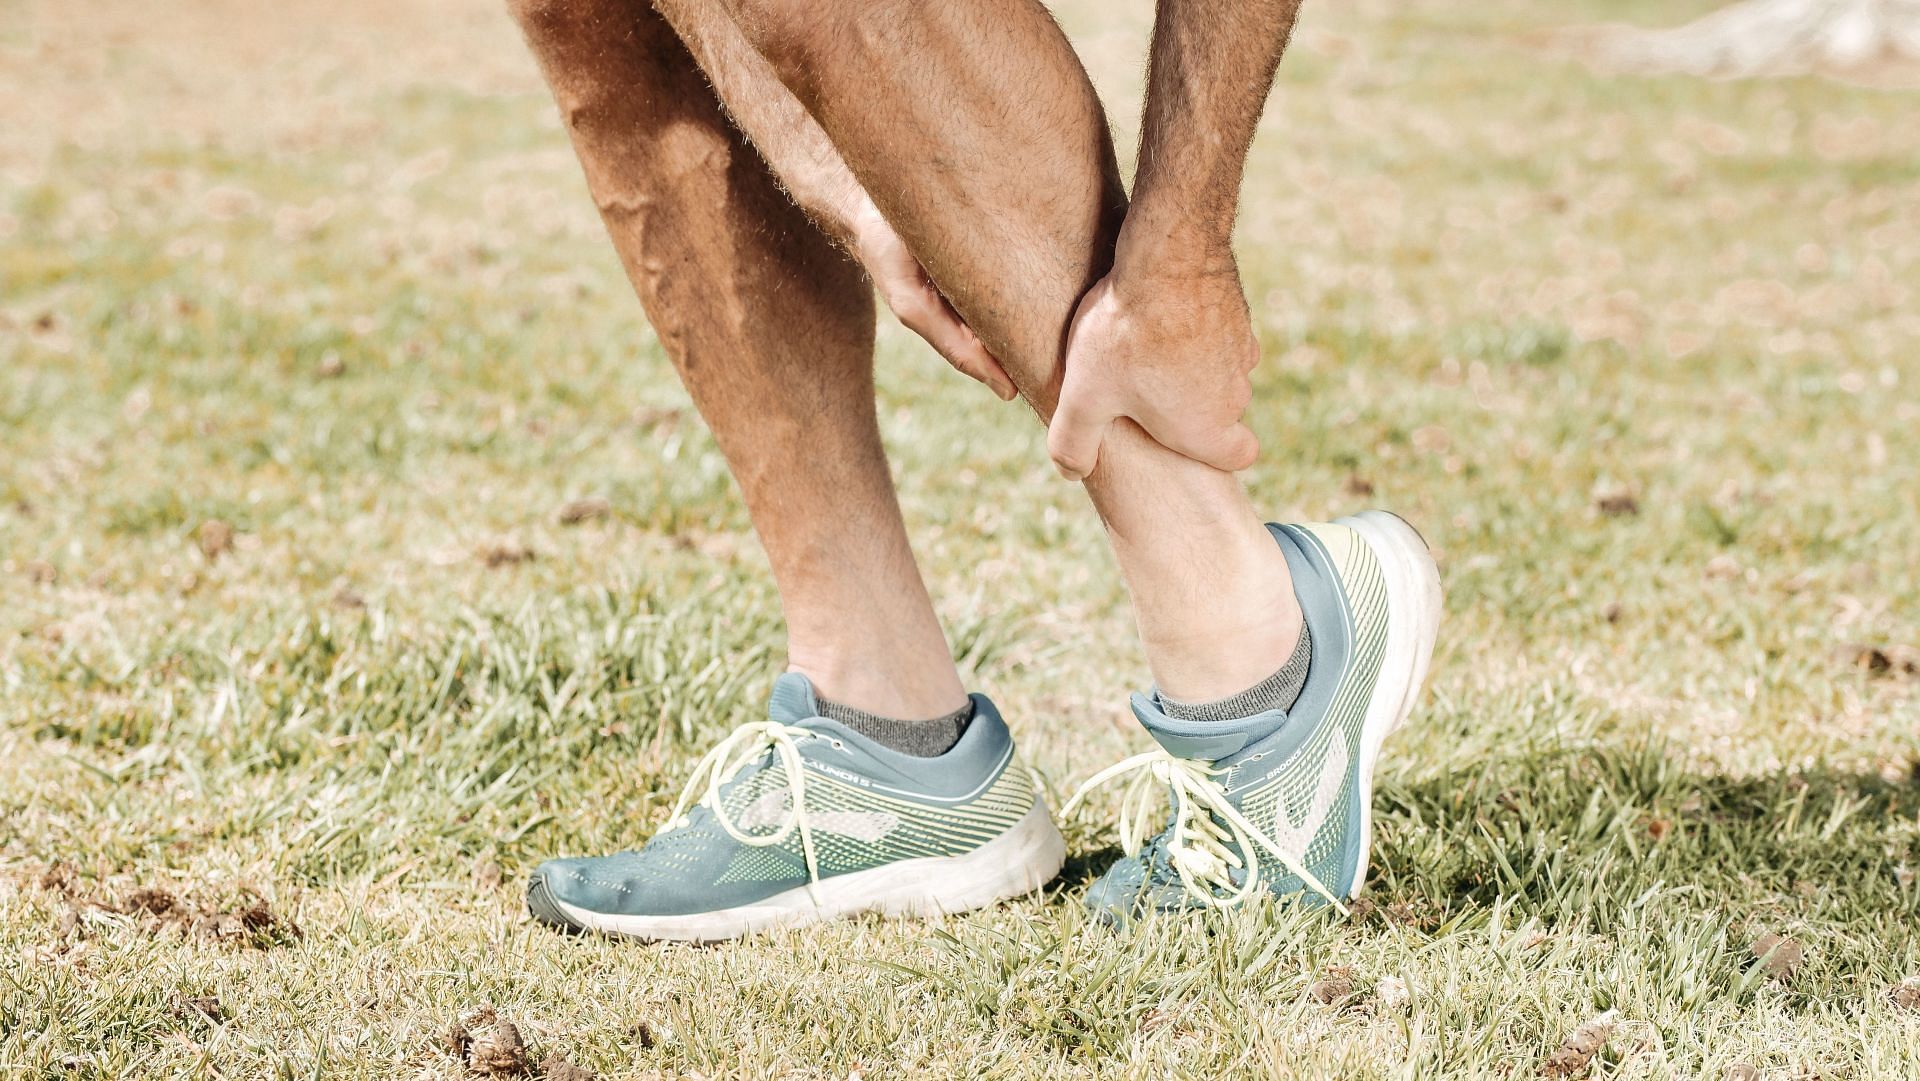 Exercising regularly can prevent severe joint pain (Image by Kindel Media / Pexels)